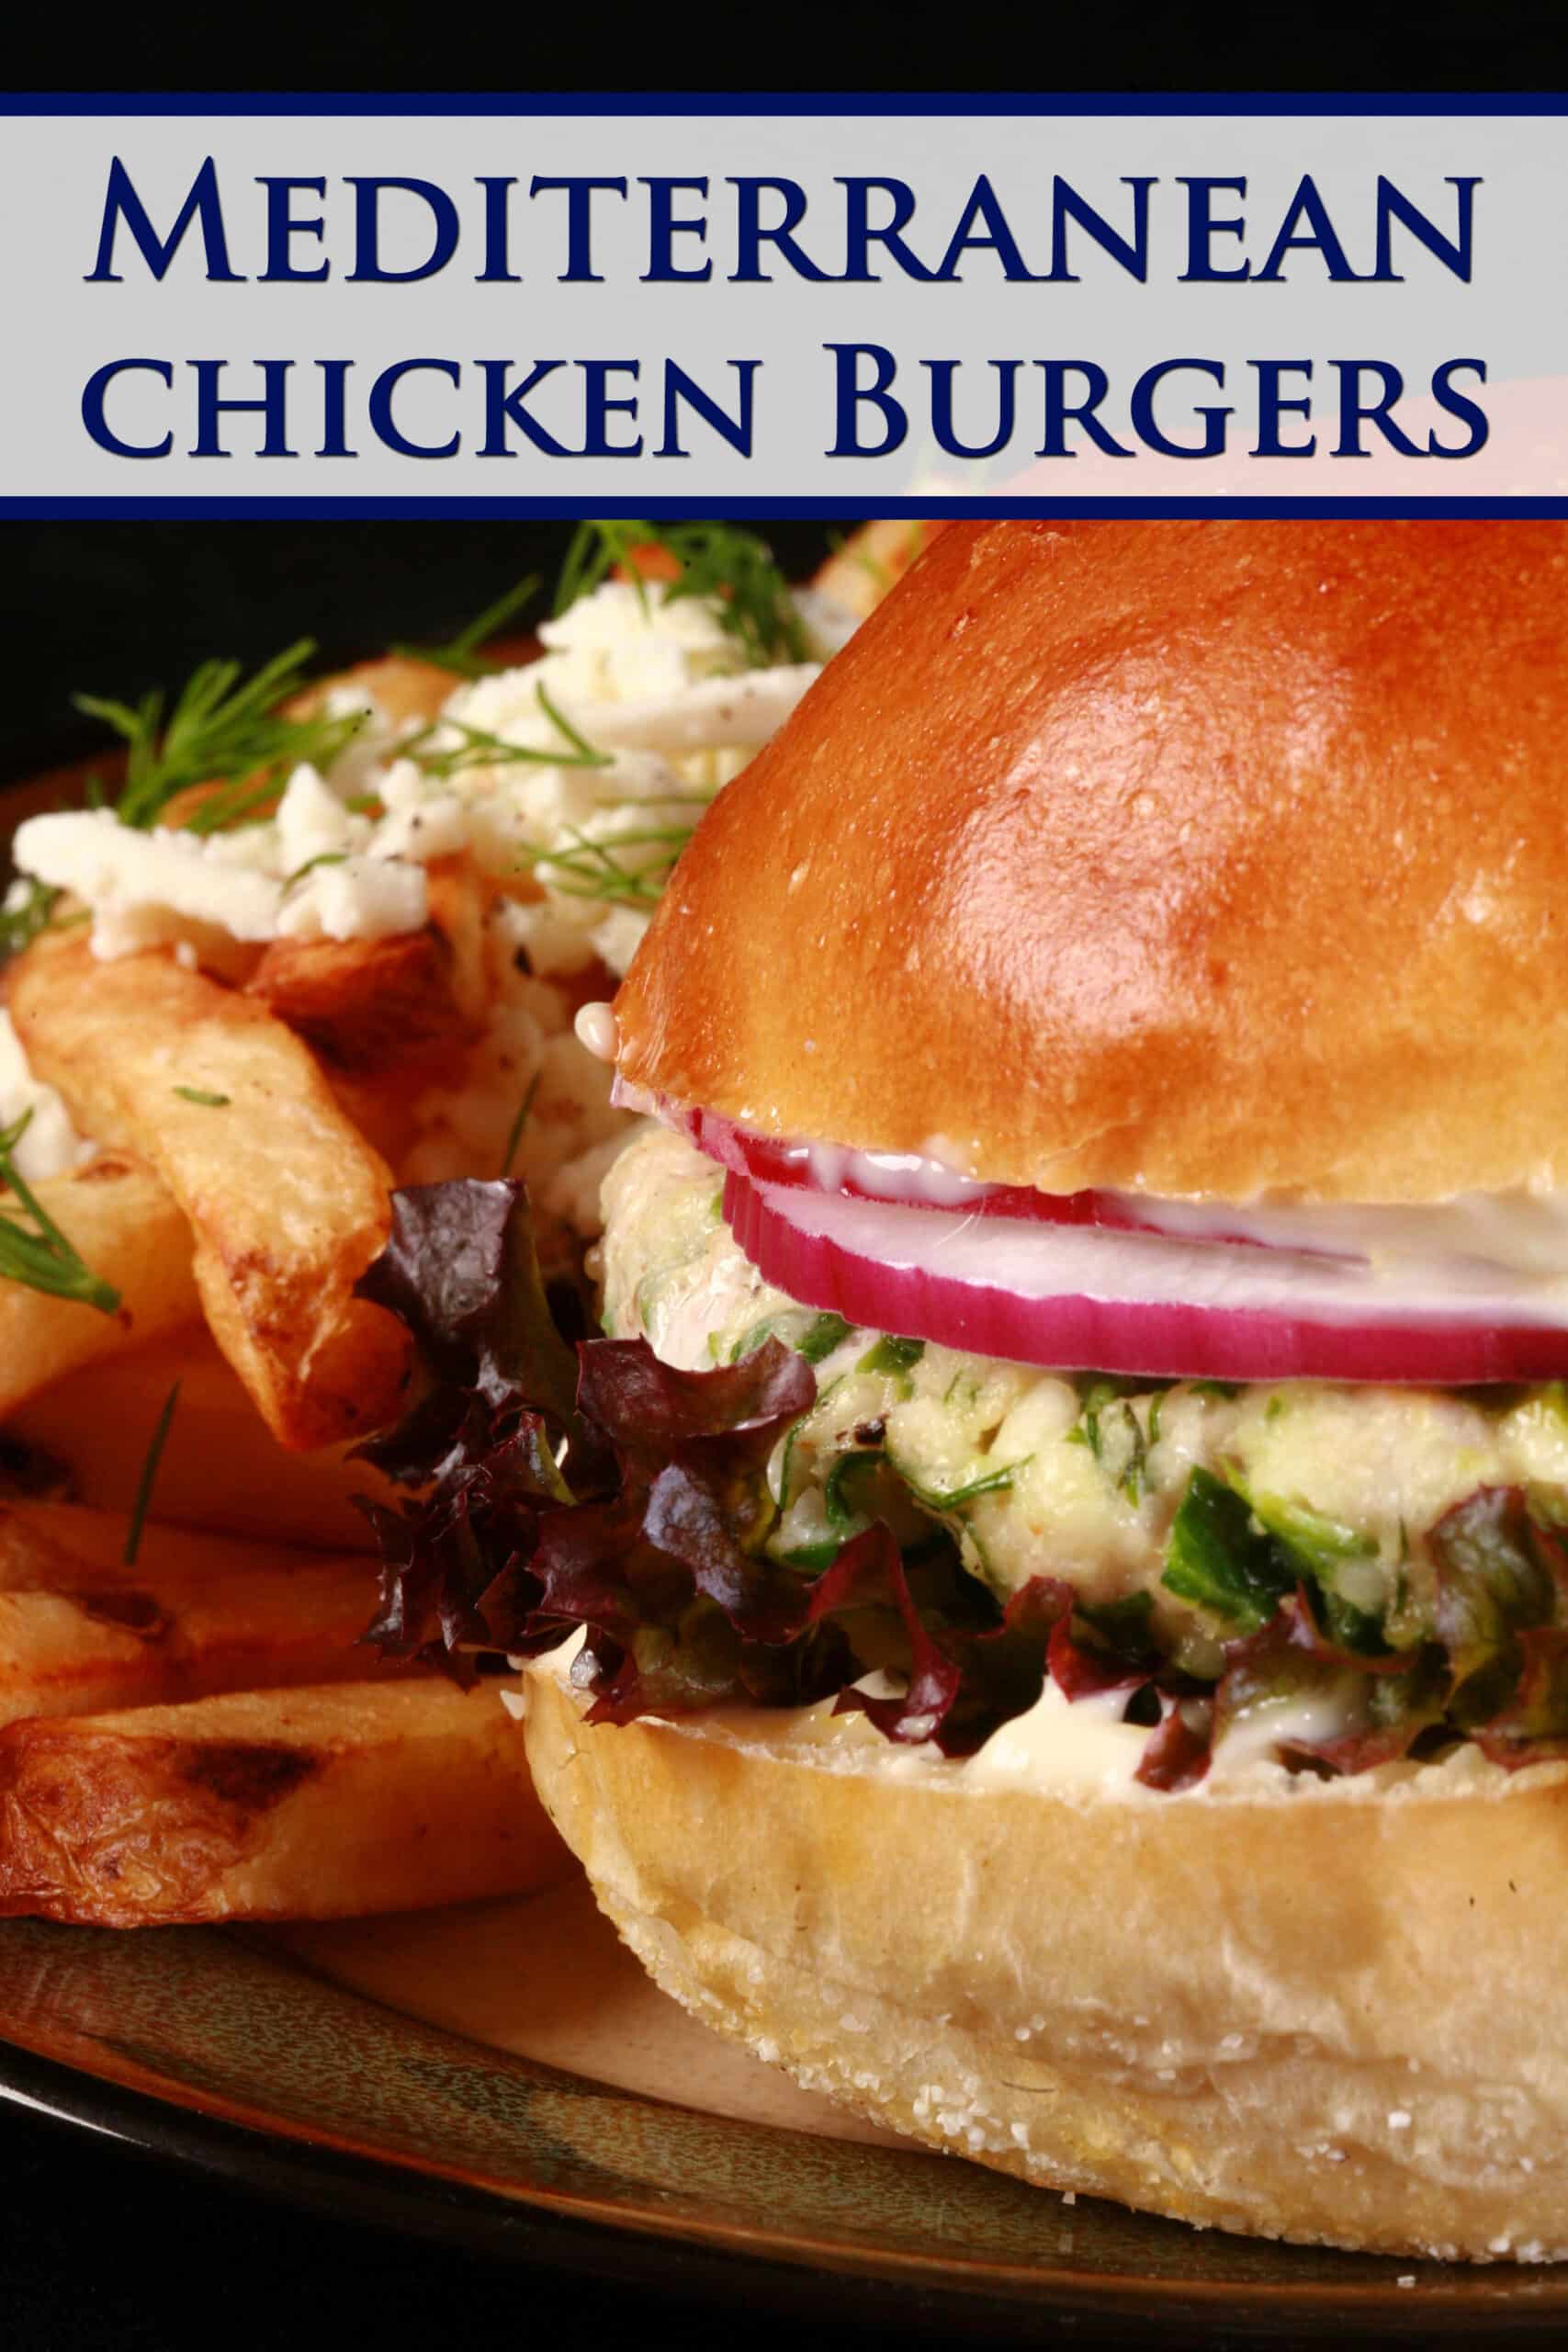 A fancy chicken burger with red onions and lettuce. Blue text says mediterranean chicken burgers.